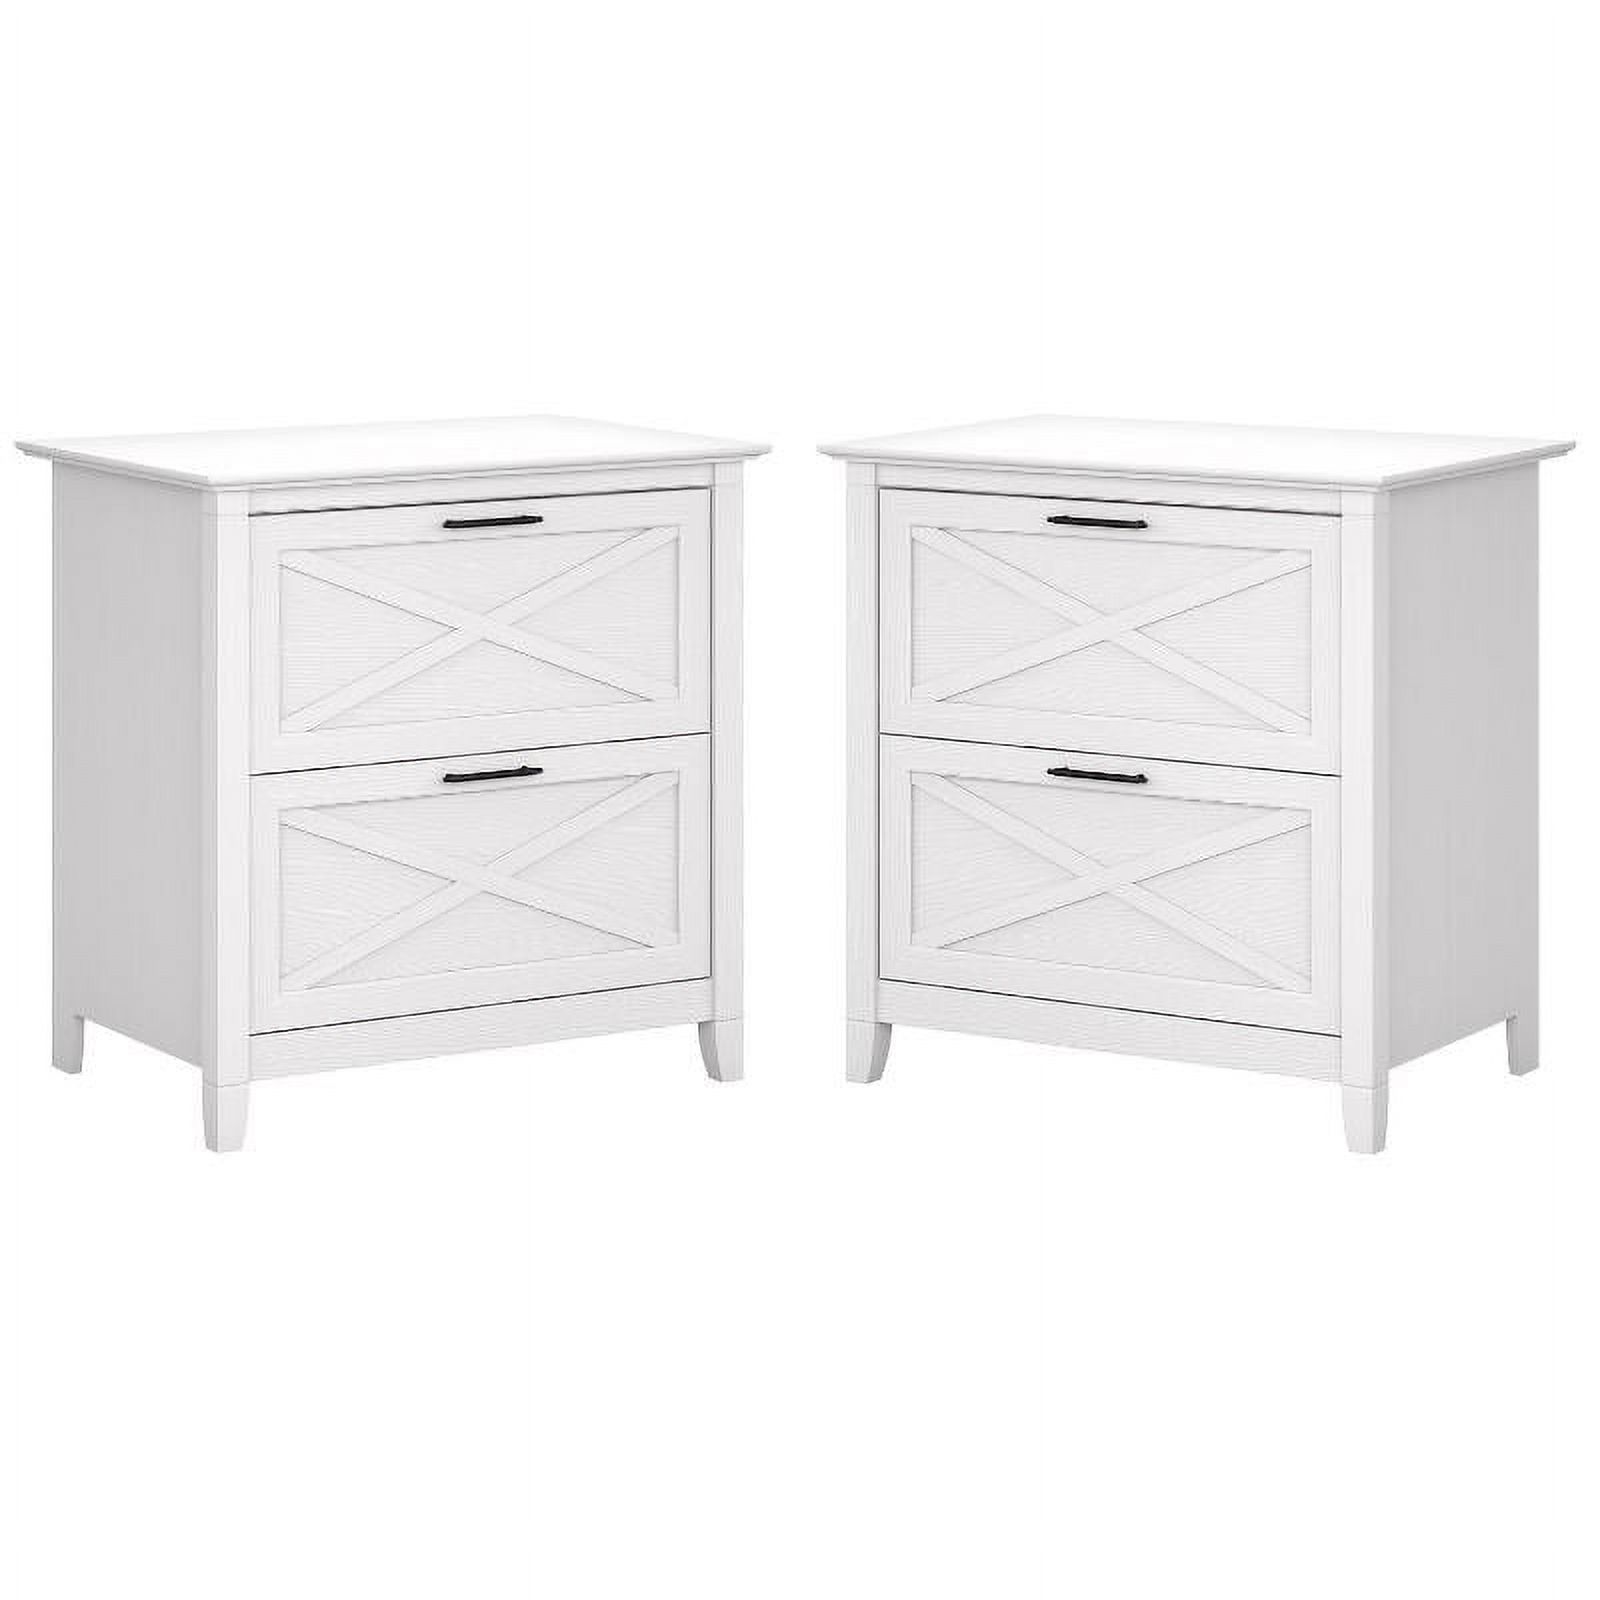 Home Square 2 Piece Lateral Filing Cabinet Set with 2 Drawer in Pure White Oak - image 1 of 8